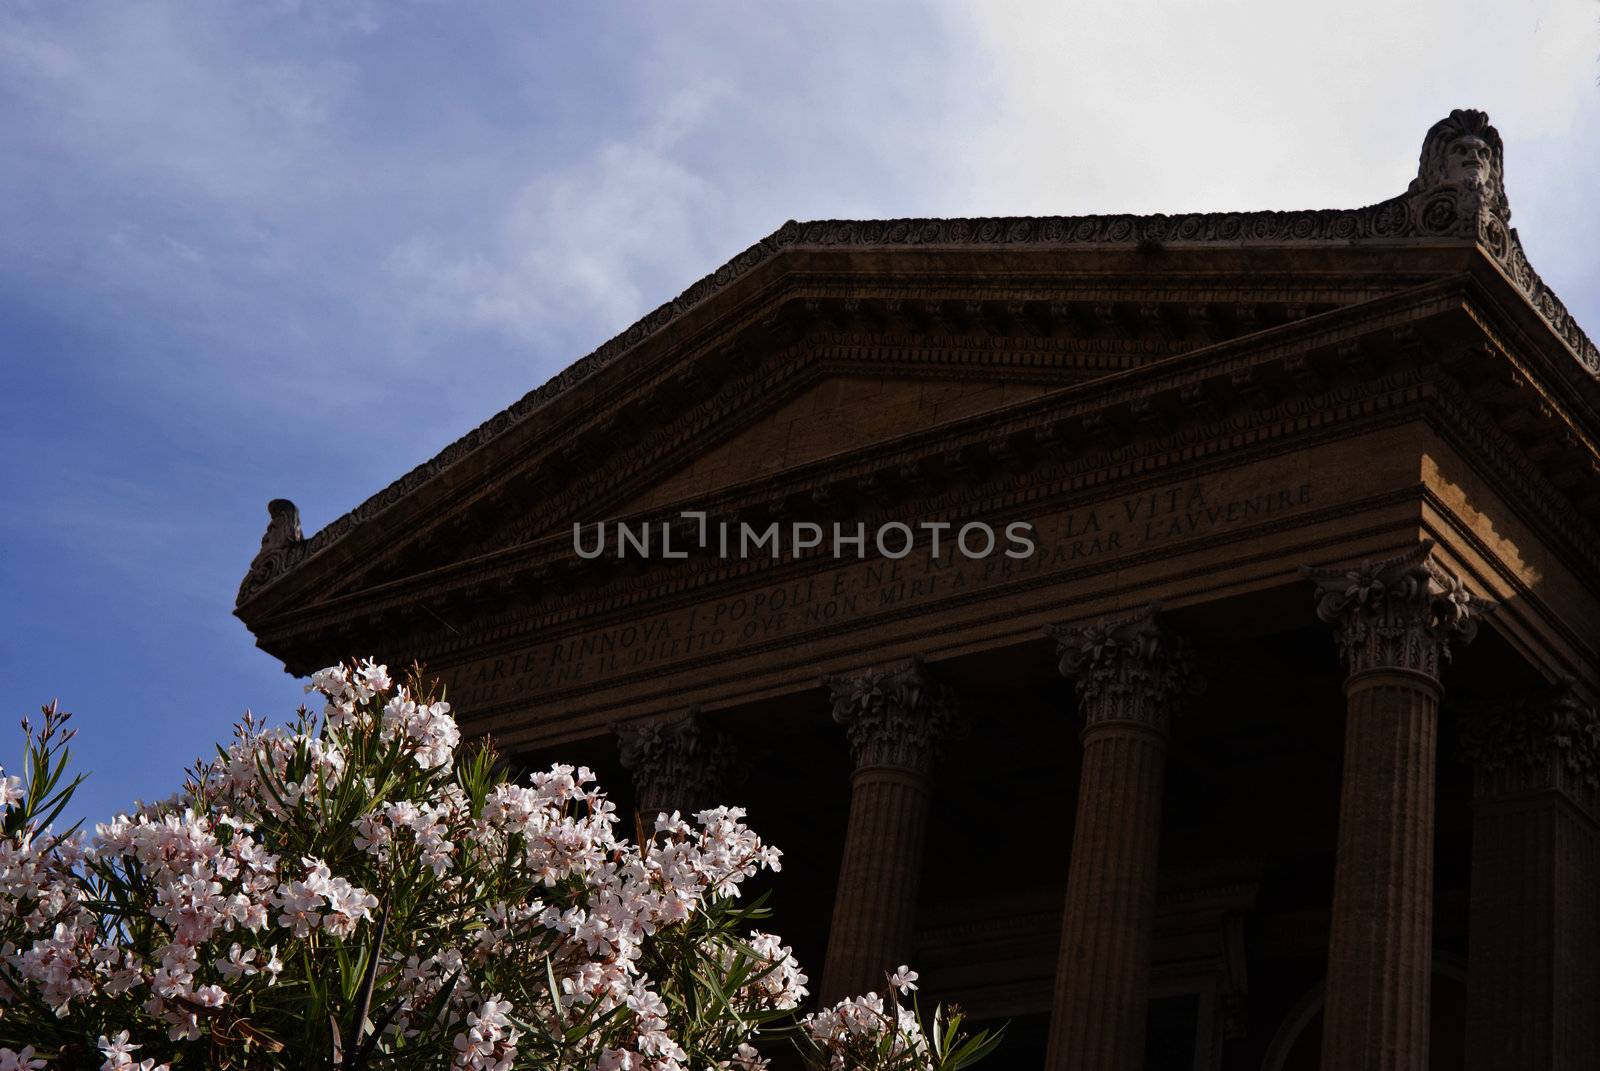 The Teatro Massimo Vittorio Emanuele is an opera house and opera company located on the Piazza Verdi in Palermo, Sicily. It was dedicated to King Victor Emanuel II.